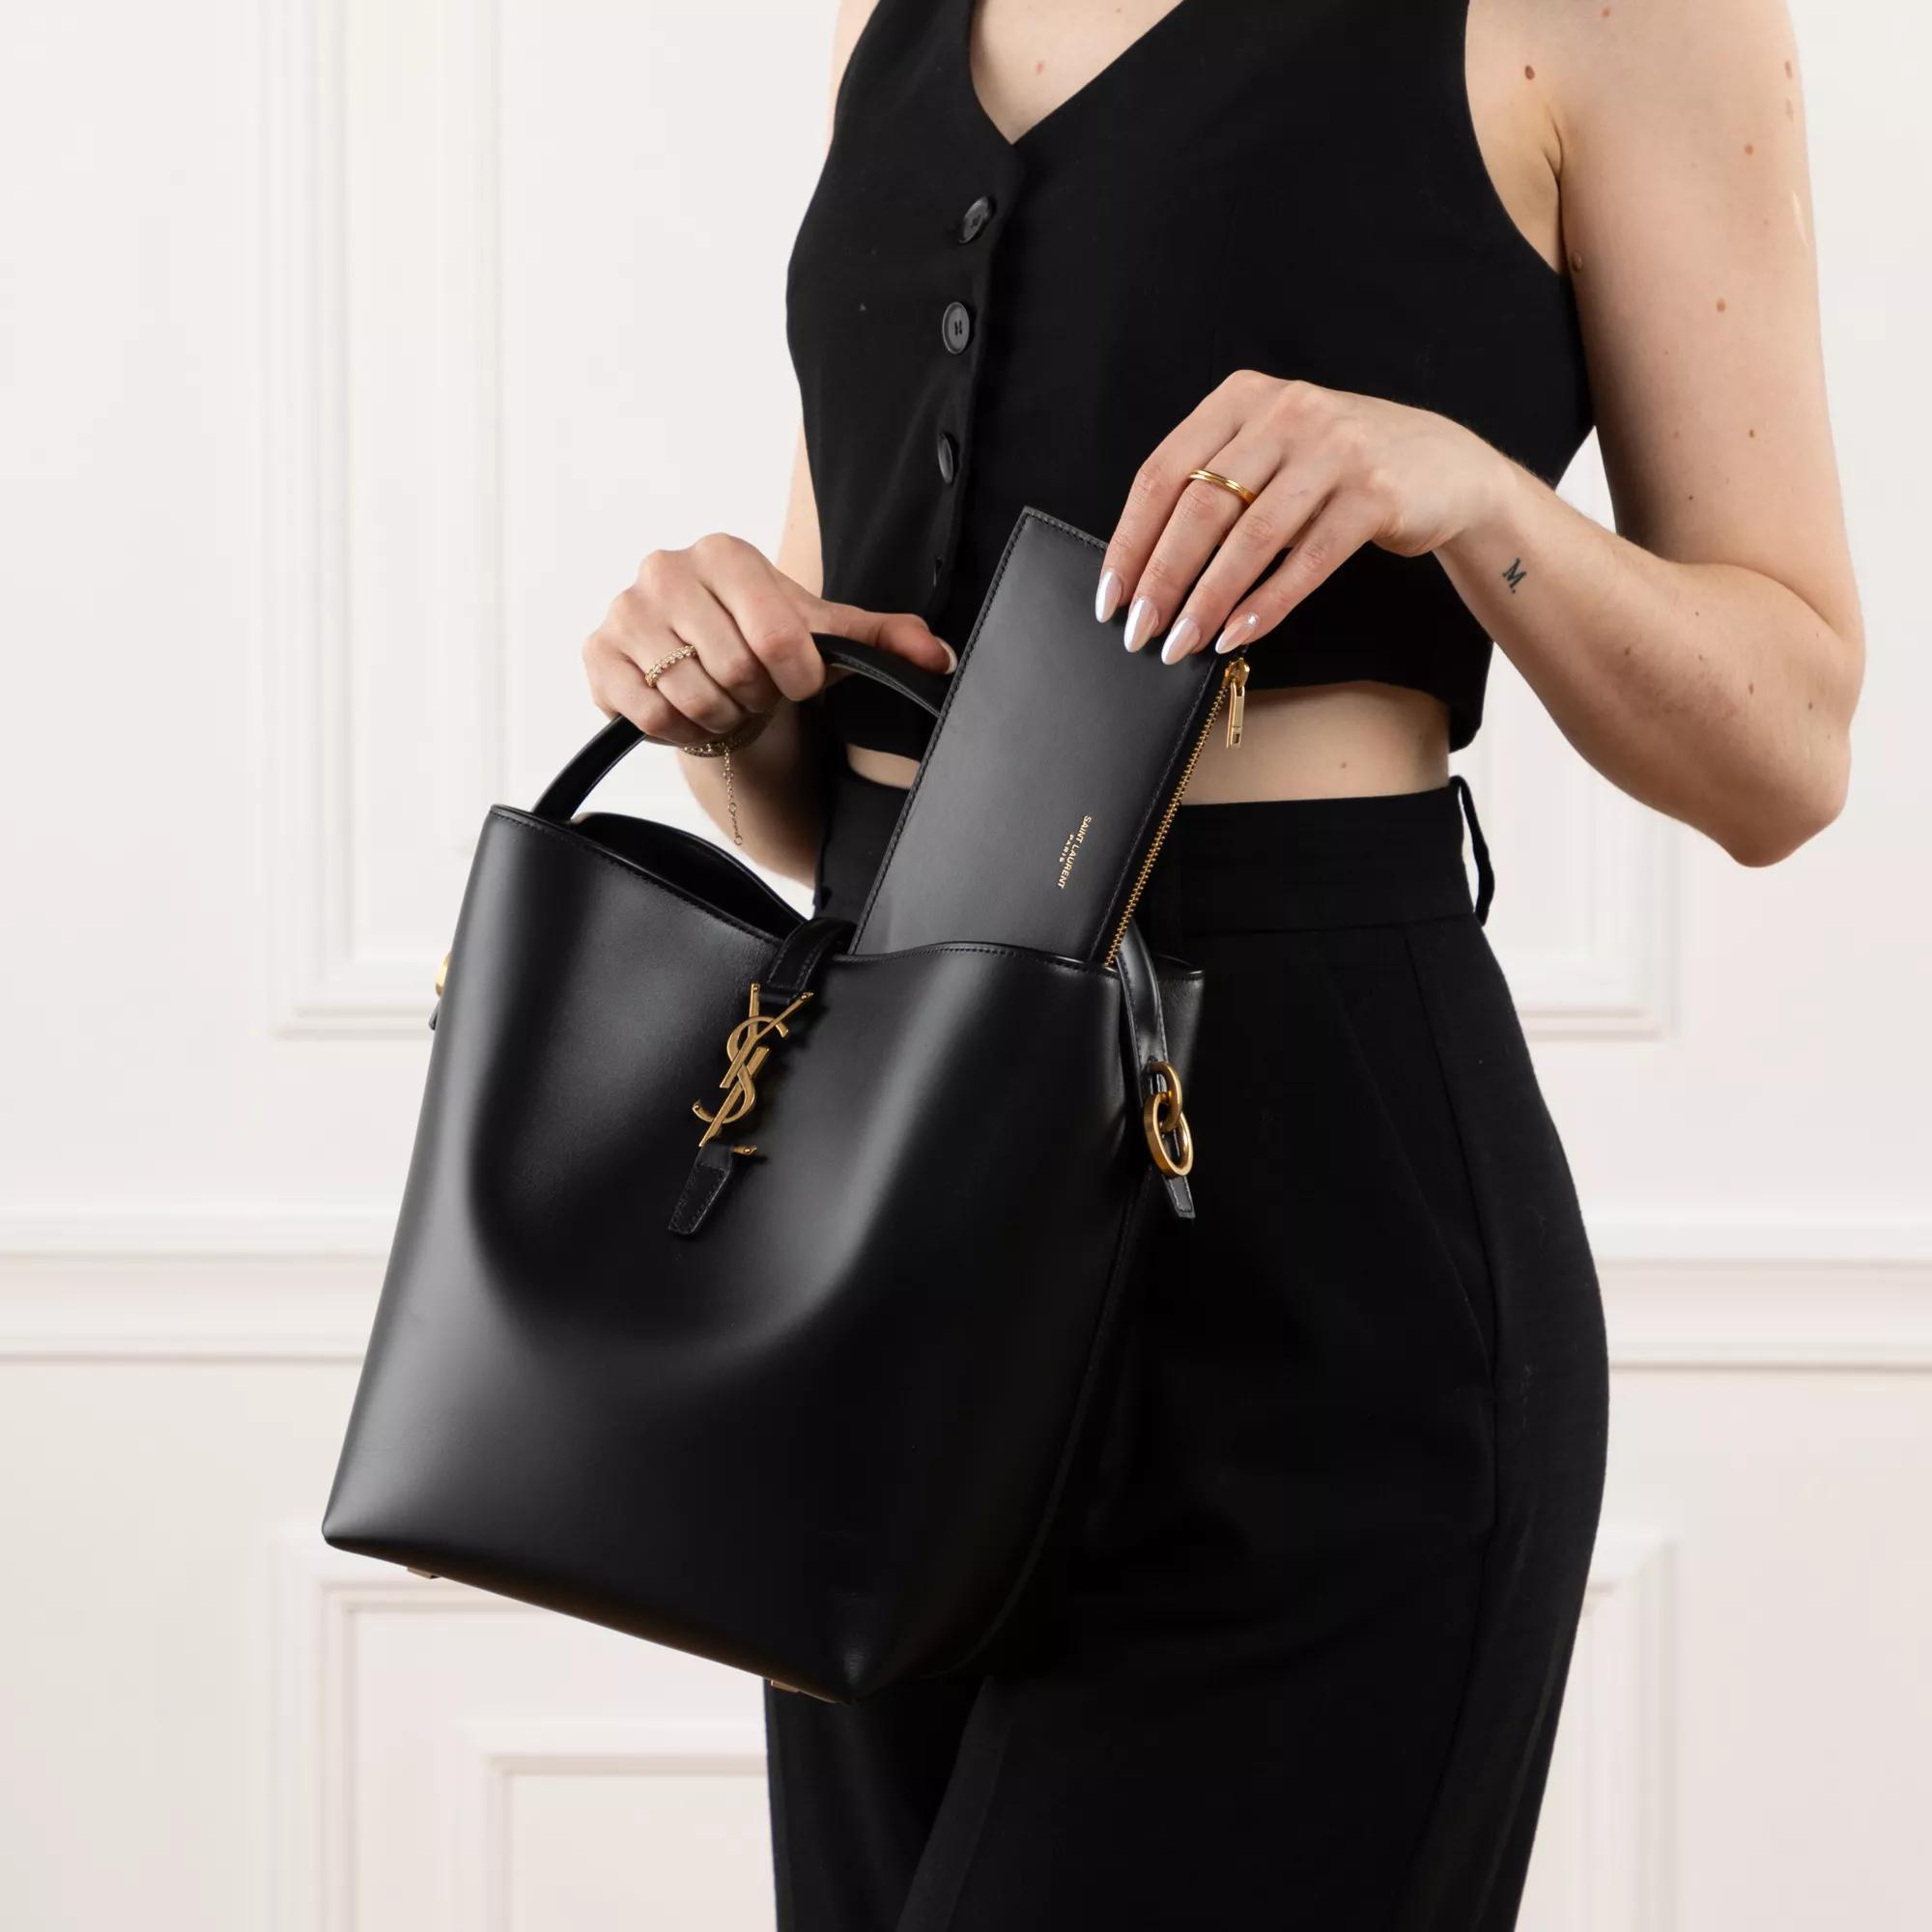 Saint Laurent Totes Le 37 Made Of Shiny Leather in zwart